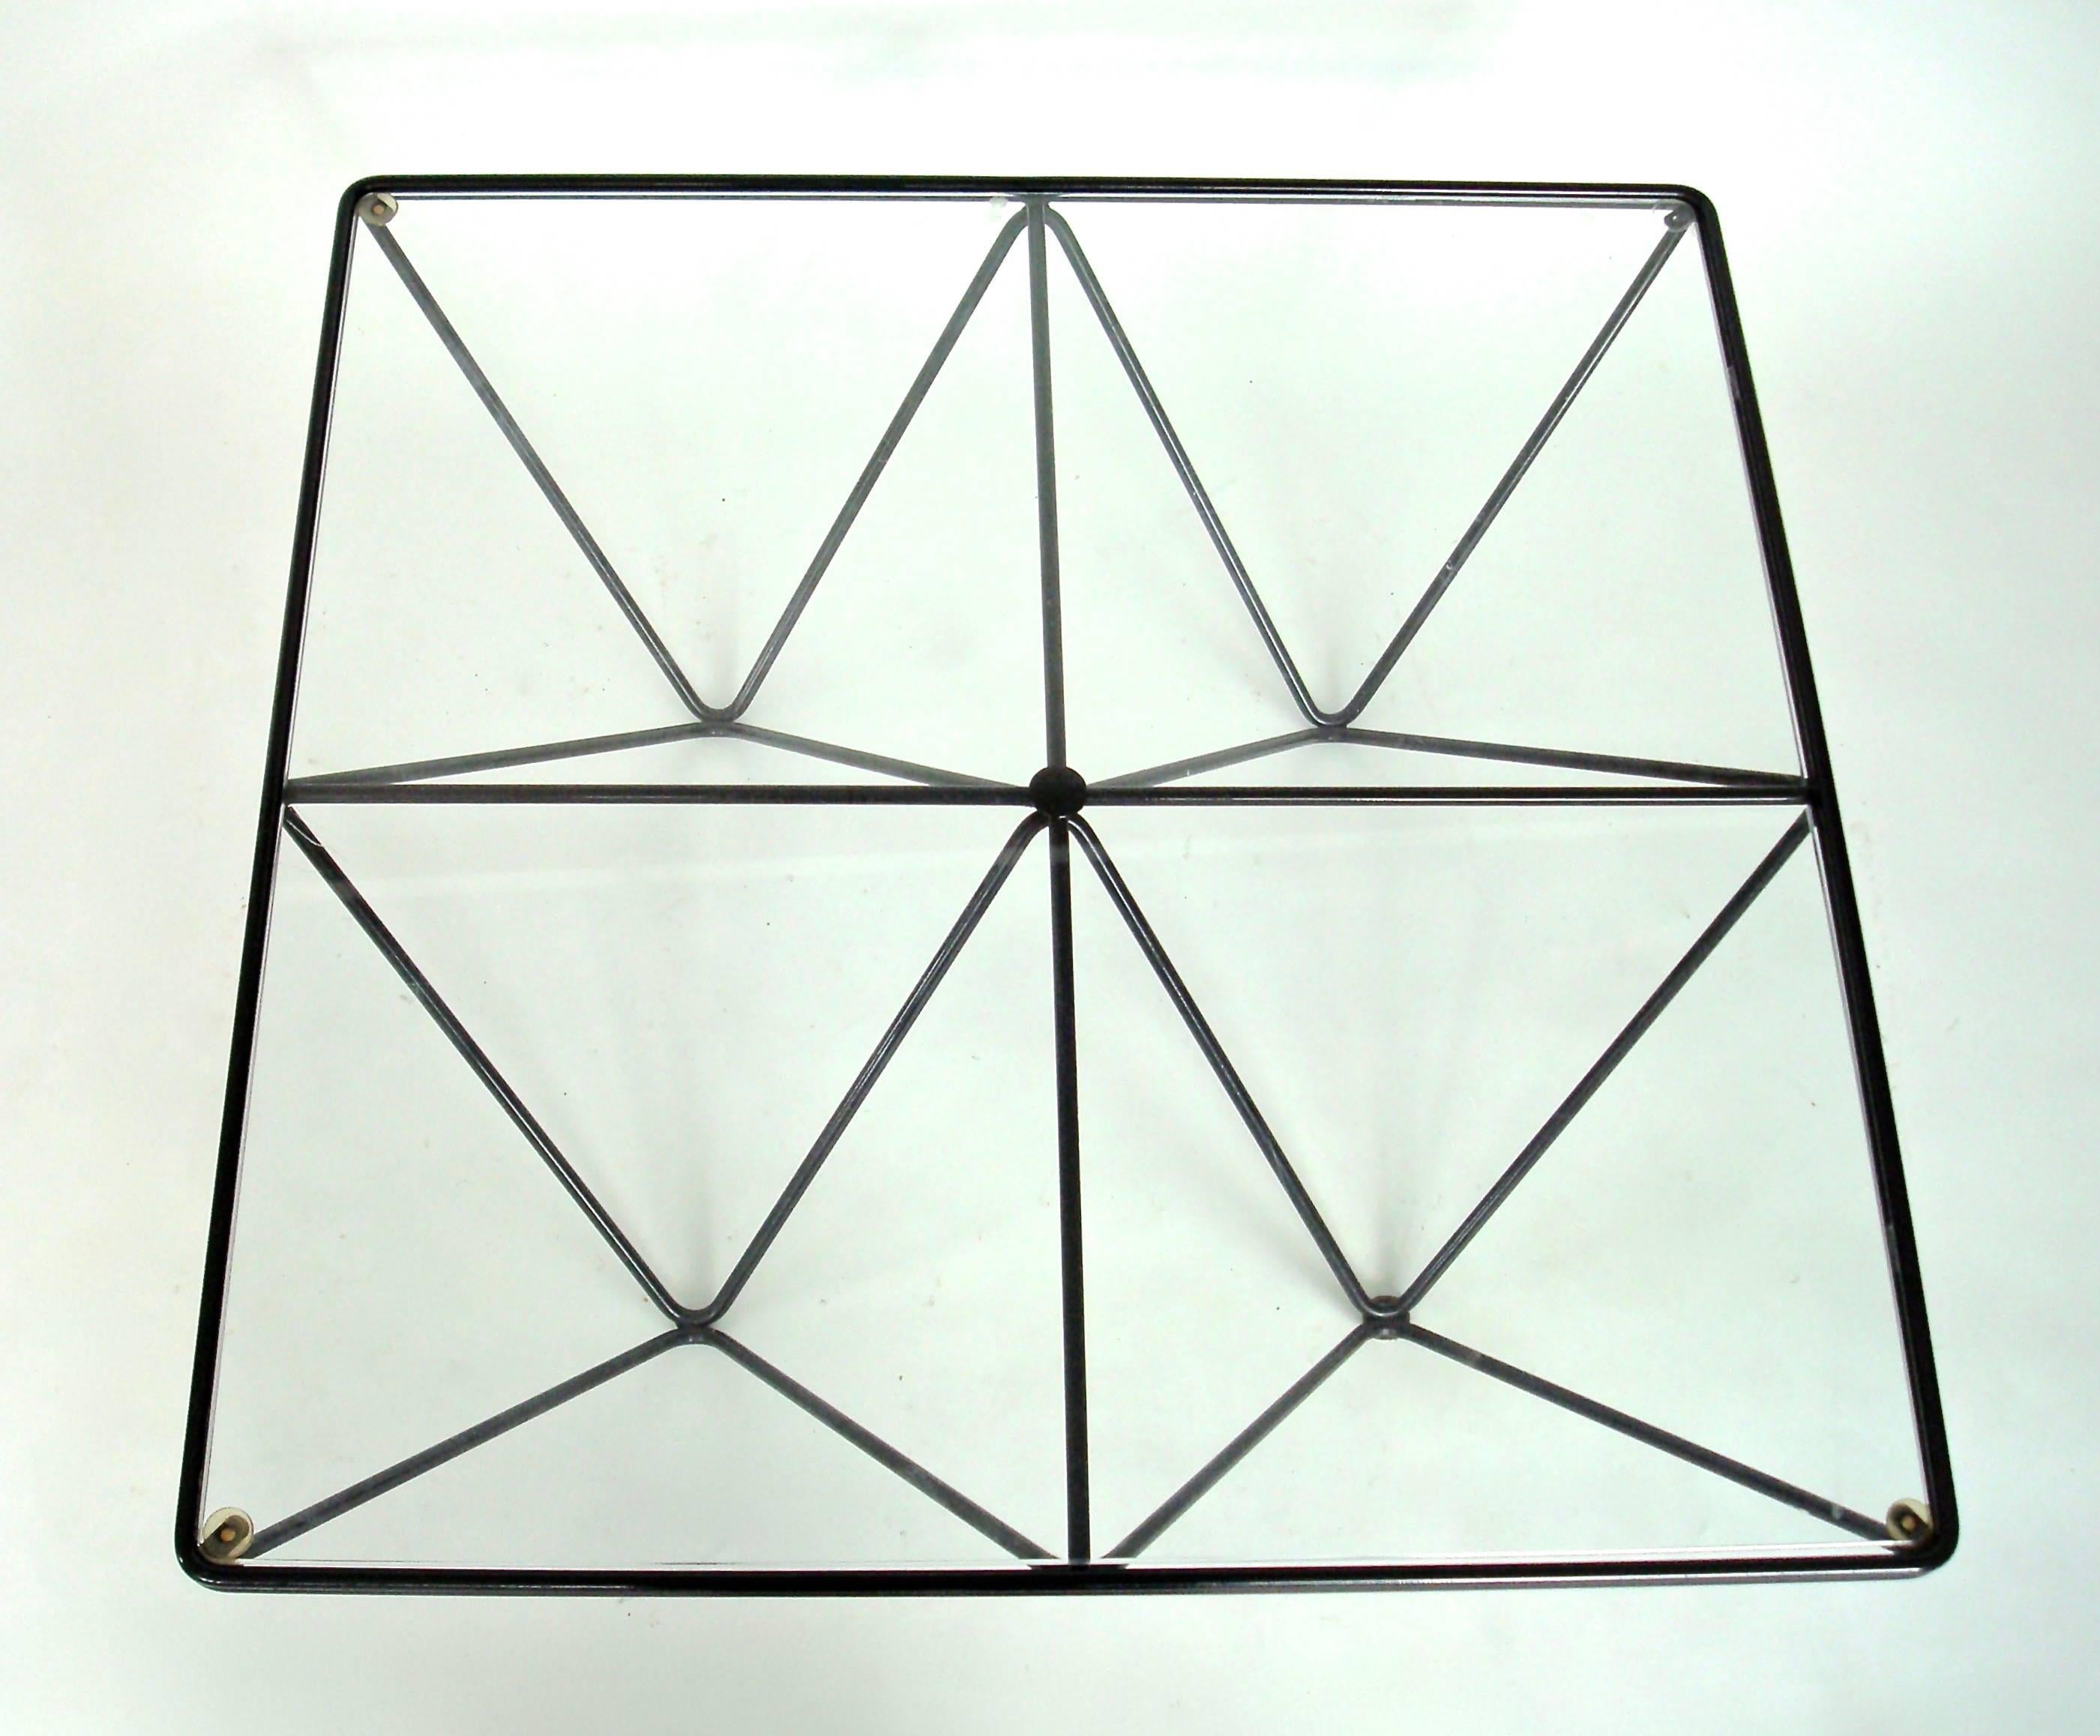 Alanda table attributed to Paolo Piva and was editioned by B&B Italia, circa 1980.
Welded enameled double steel rods with a glass top. Very graphic table with black steel rods and clear glass top. 
Several sizes were designed and produced, no longer